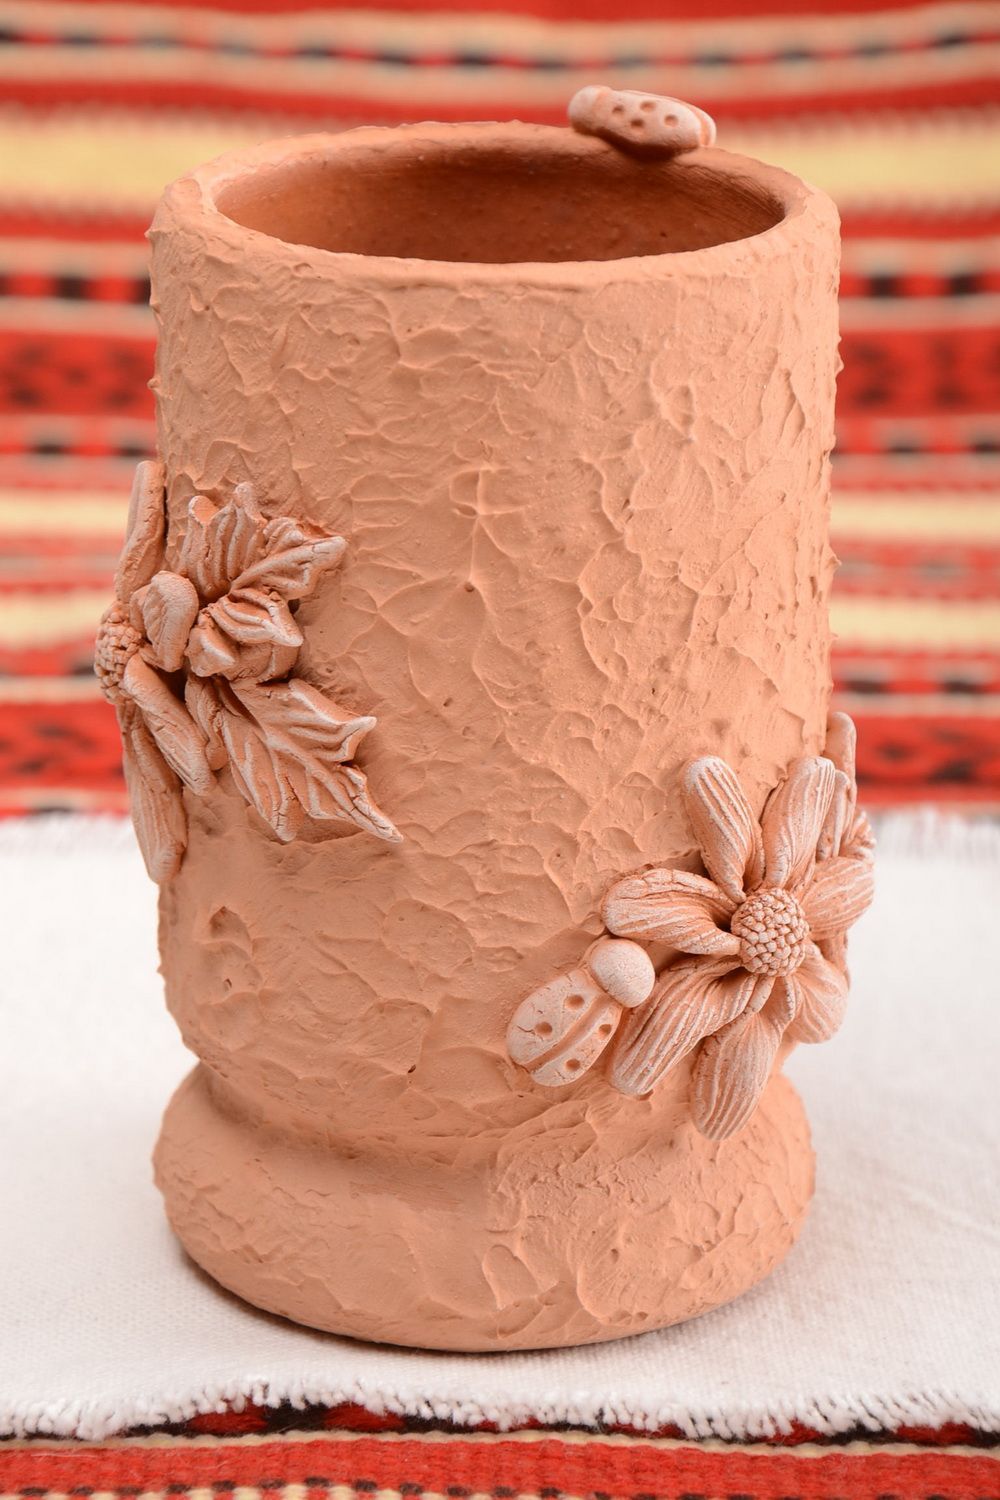 5-inch handmade clay flower vase with molded flower ornament 1 lb photo 1